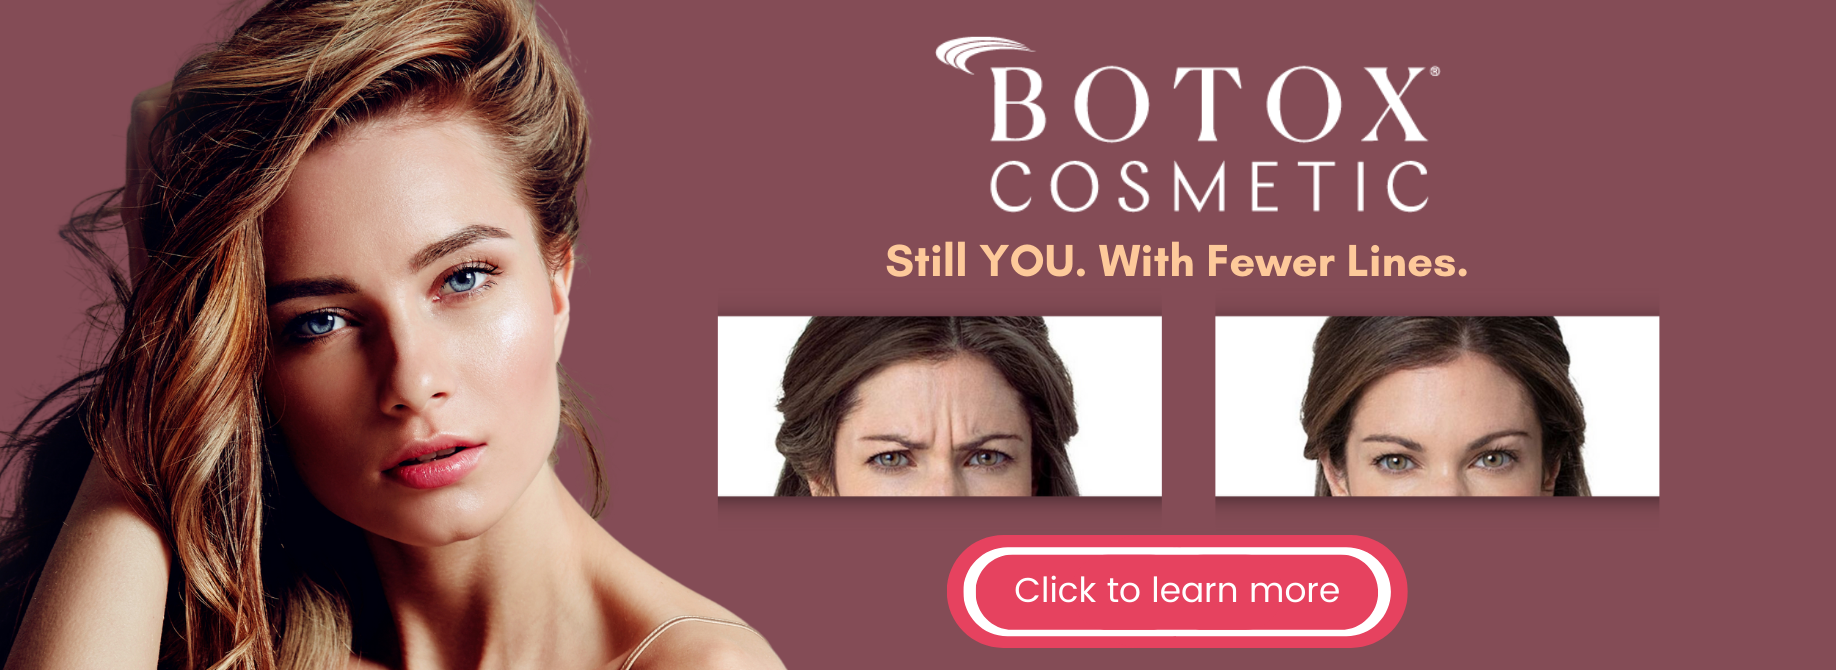 Faces of South Tampa Botox Cosmetic